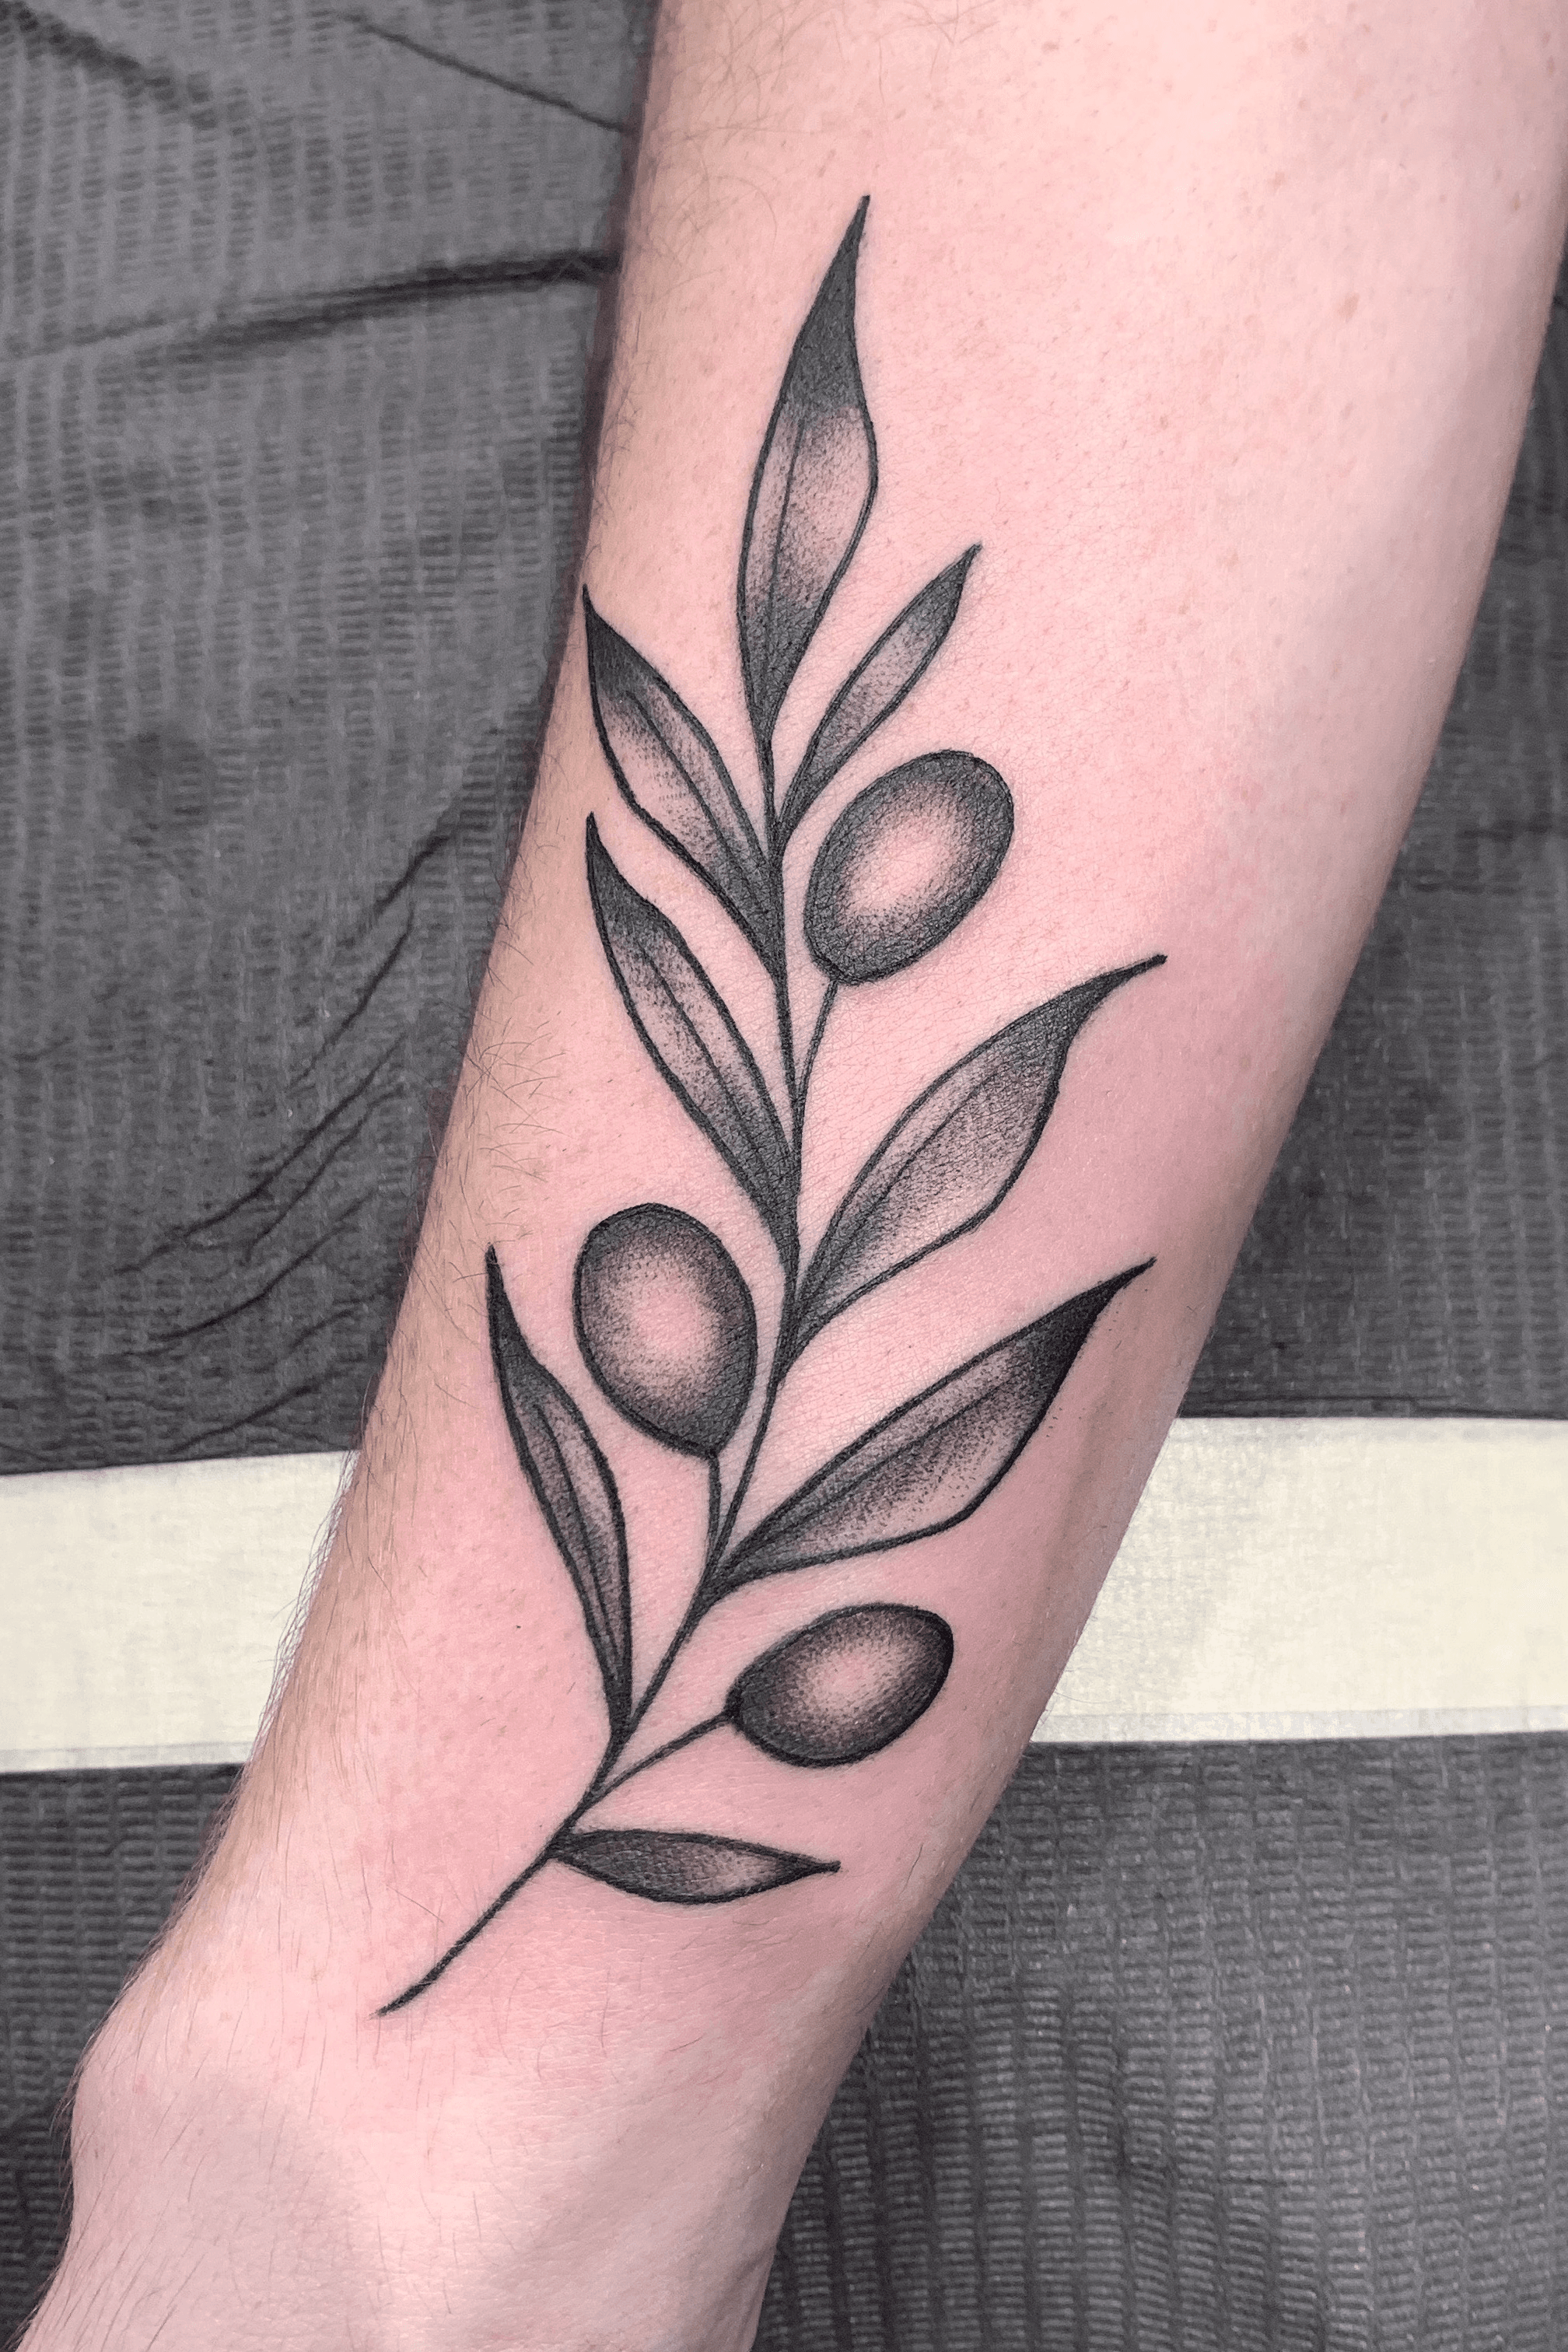 Finally got a hang on best sticking angles so I can tattoo more  efficiently 4inch ish olive branch using 7rl and 5rl Took about 35  hours Instagram artgalleryoflucy  rsticknpokes